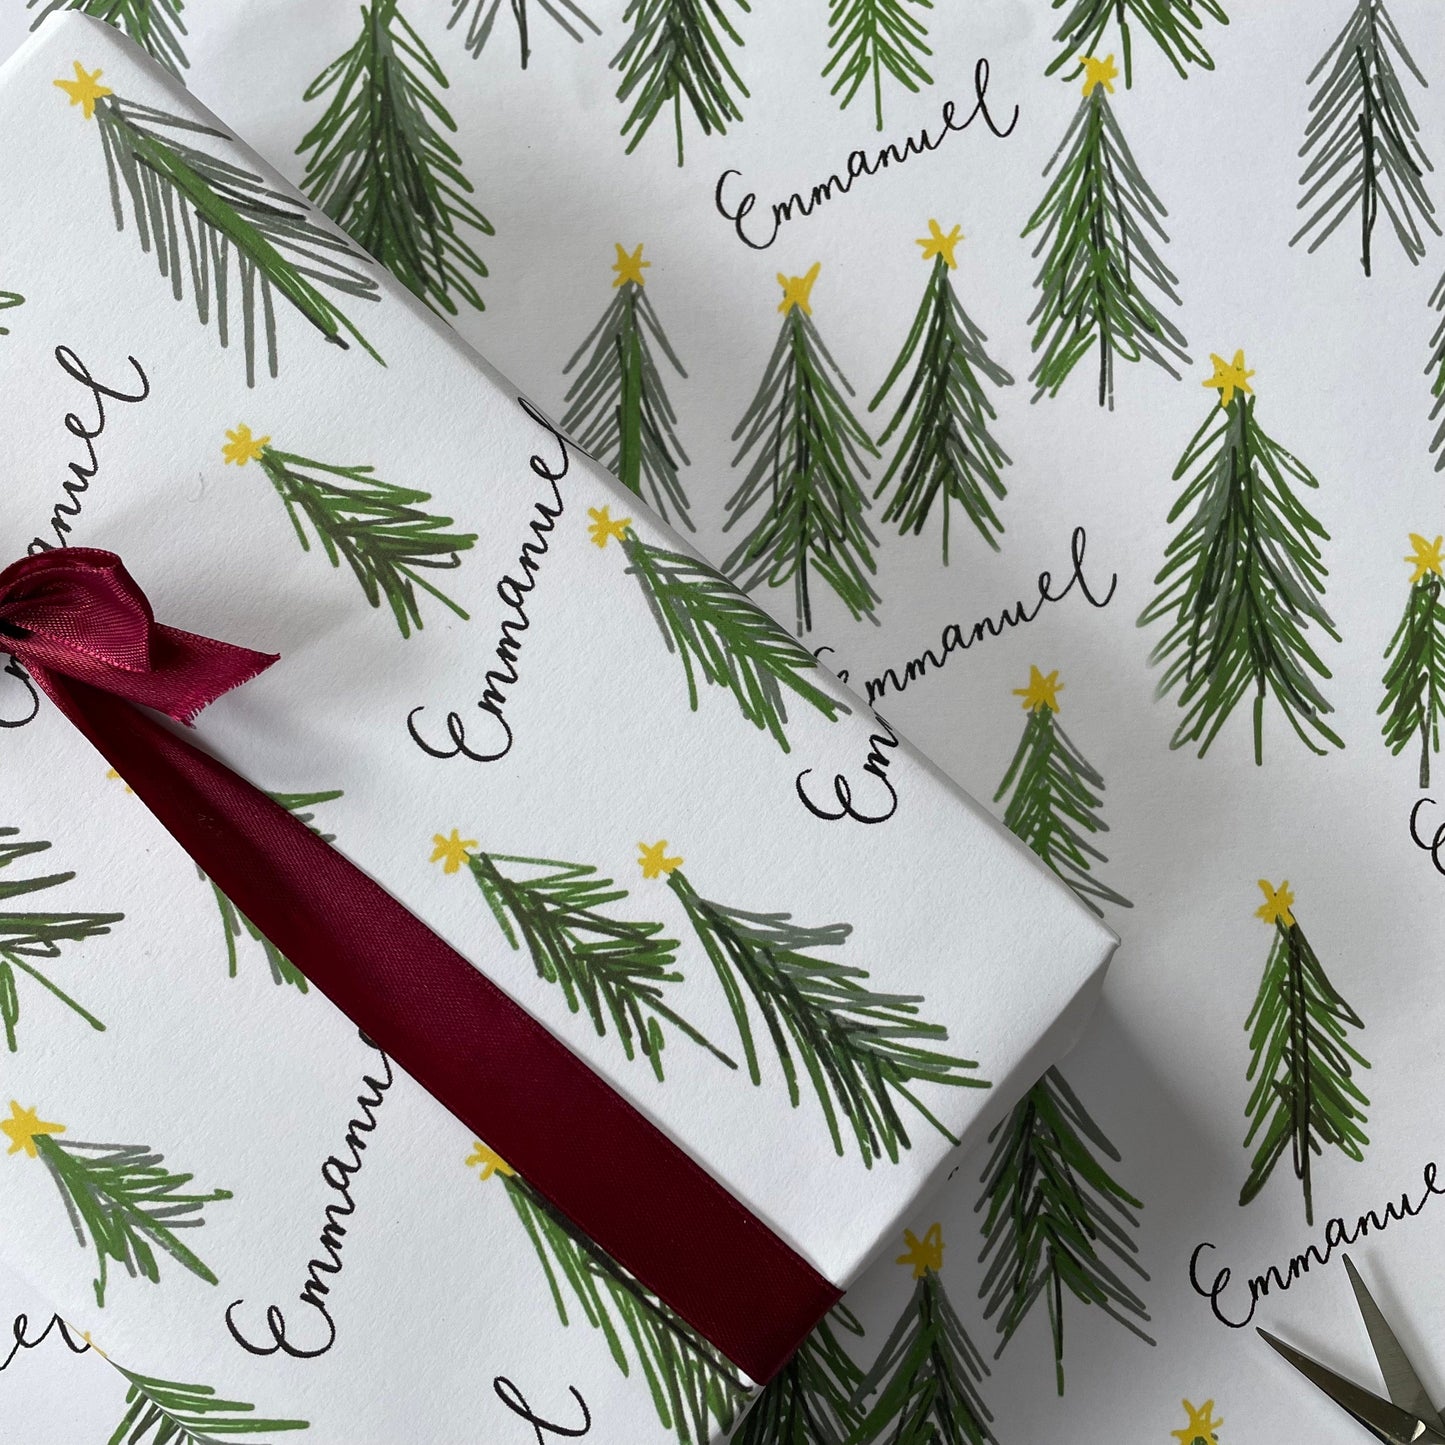 And Hope Designs Wrapping Paper “Emmanuel” Christmas tree wrapping paper